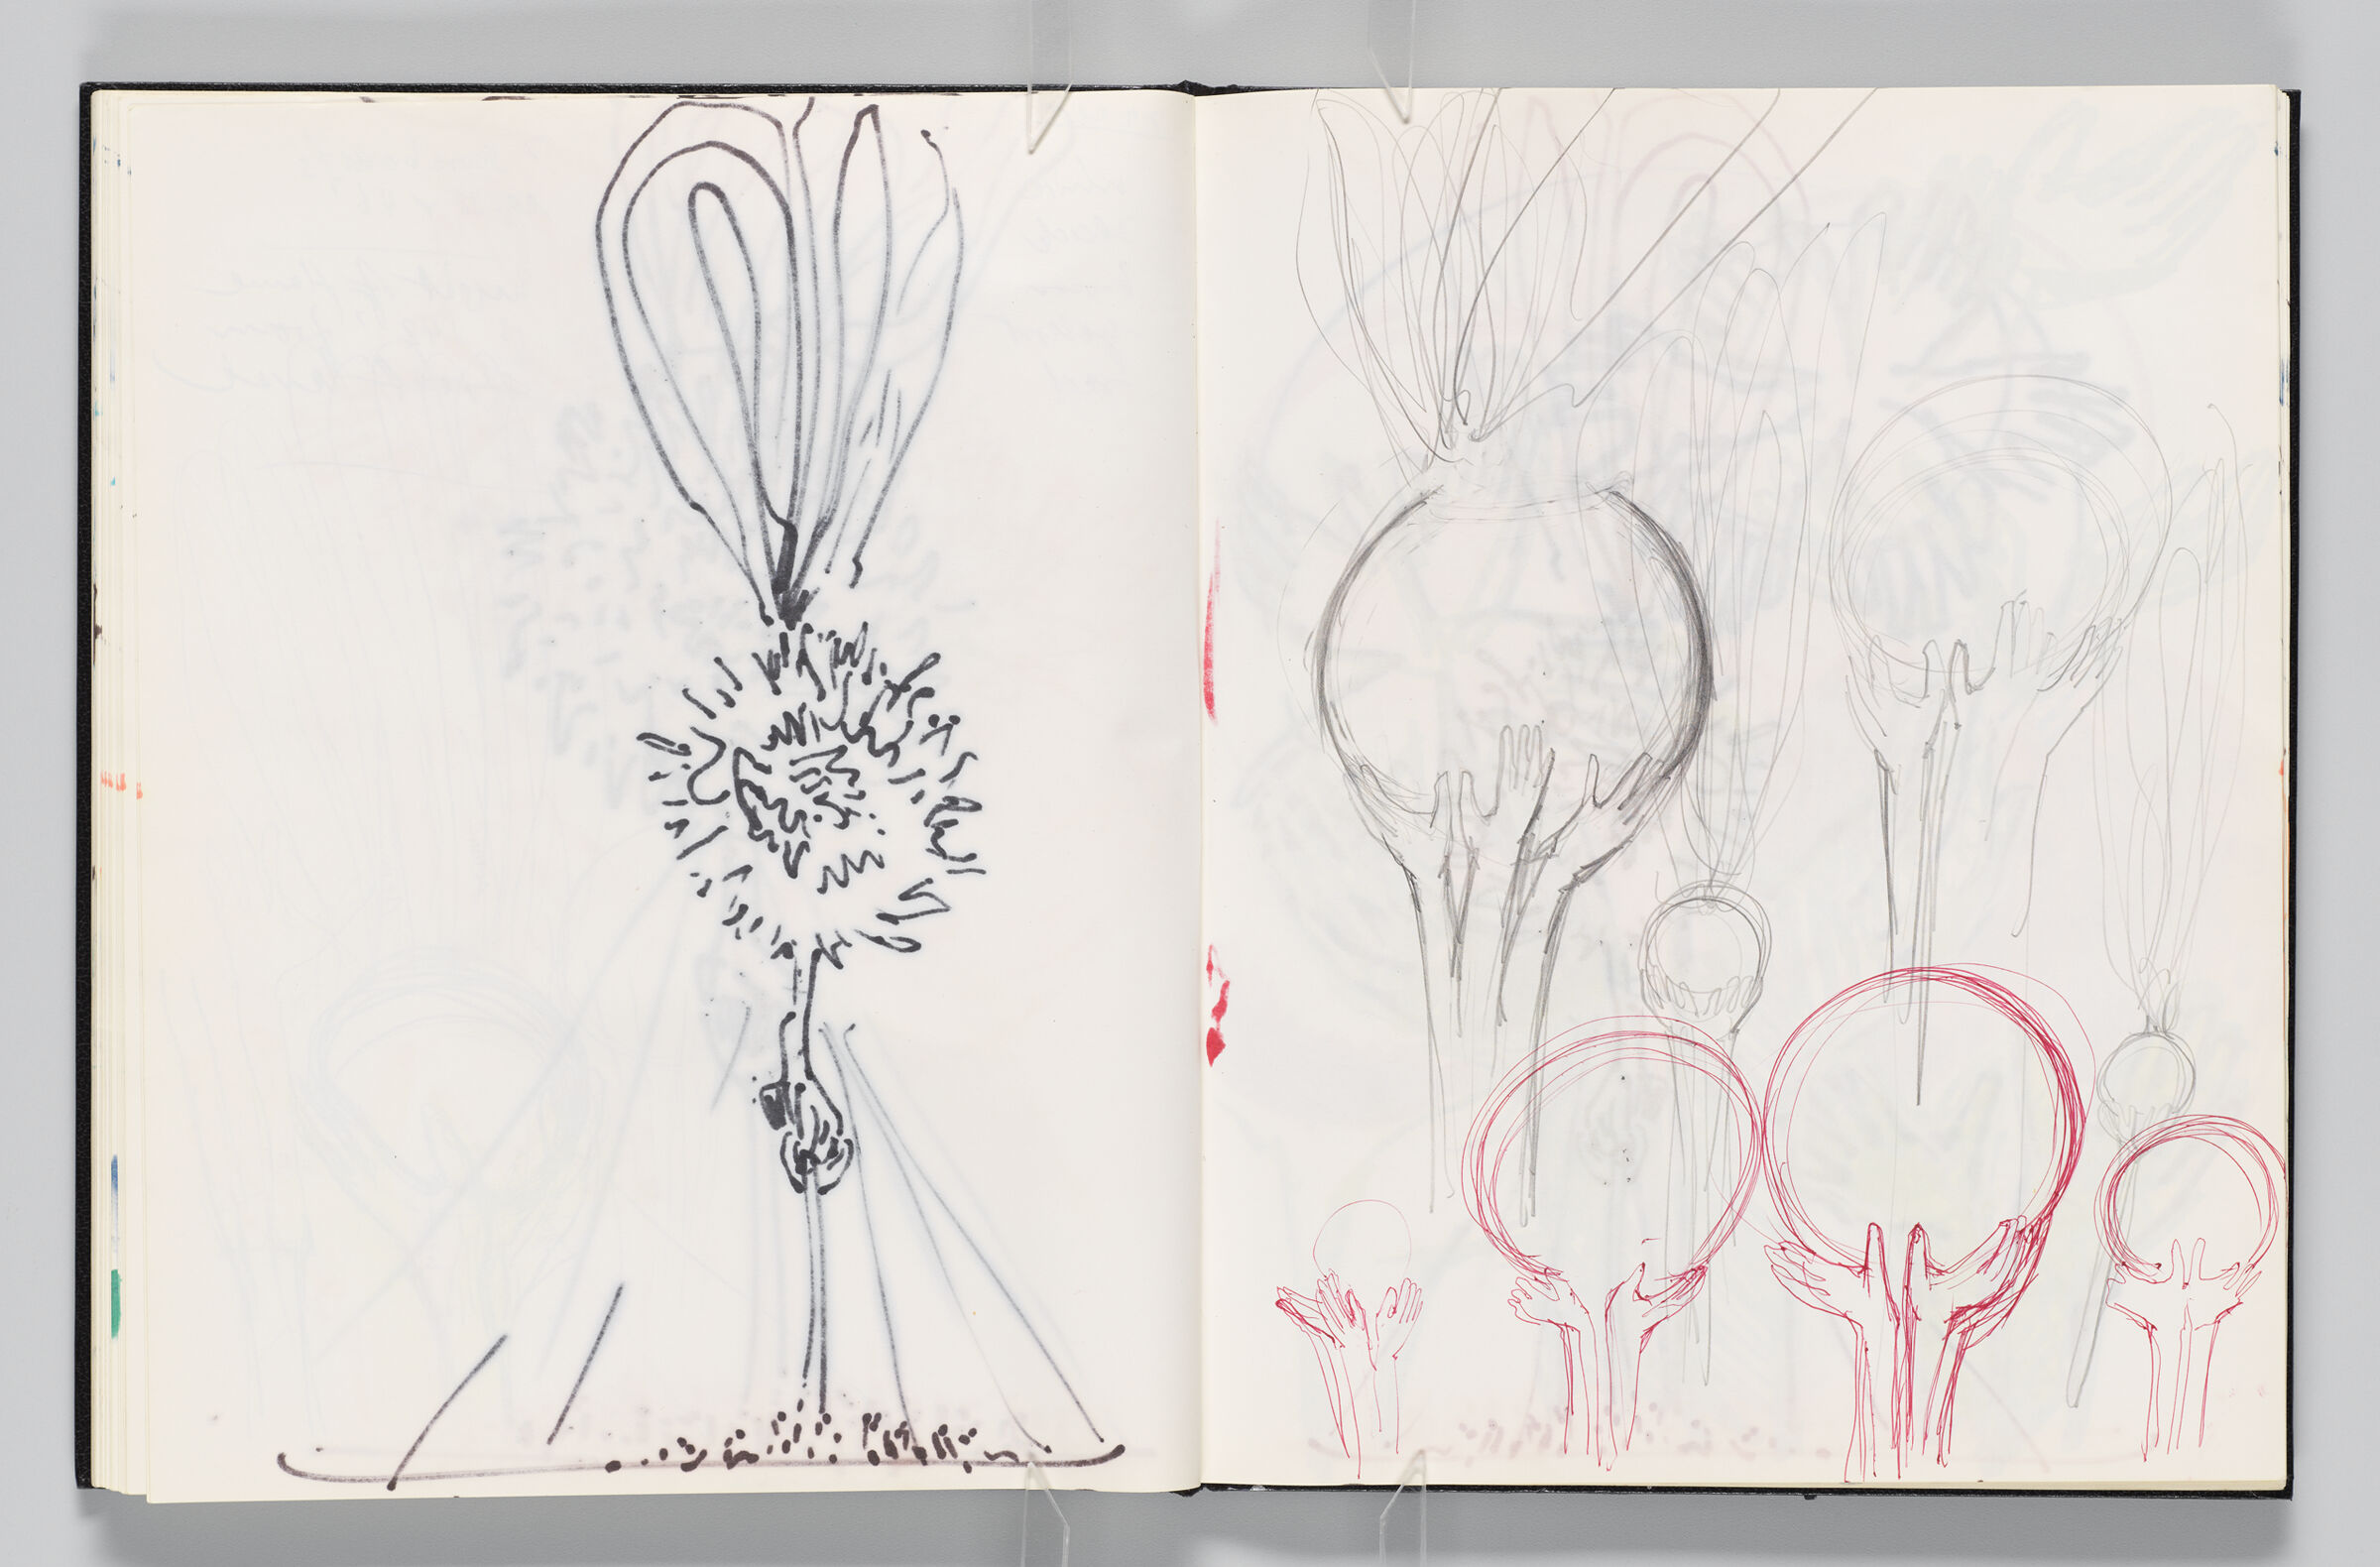 Untitled (Bleed-Through Of Previous Page, Left Page); Untitled (Hands Holding Globes, Right Page)